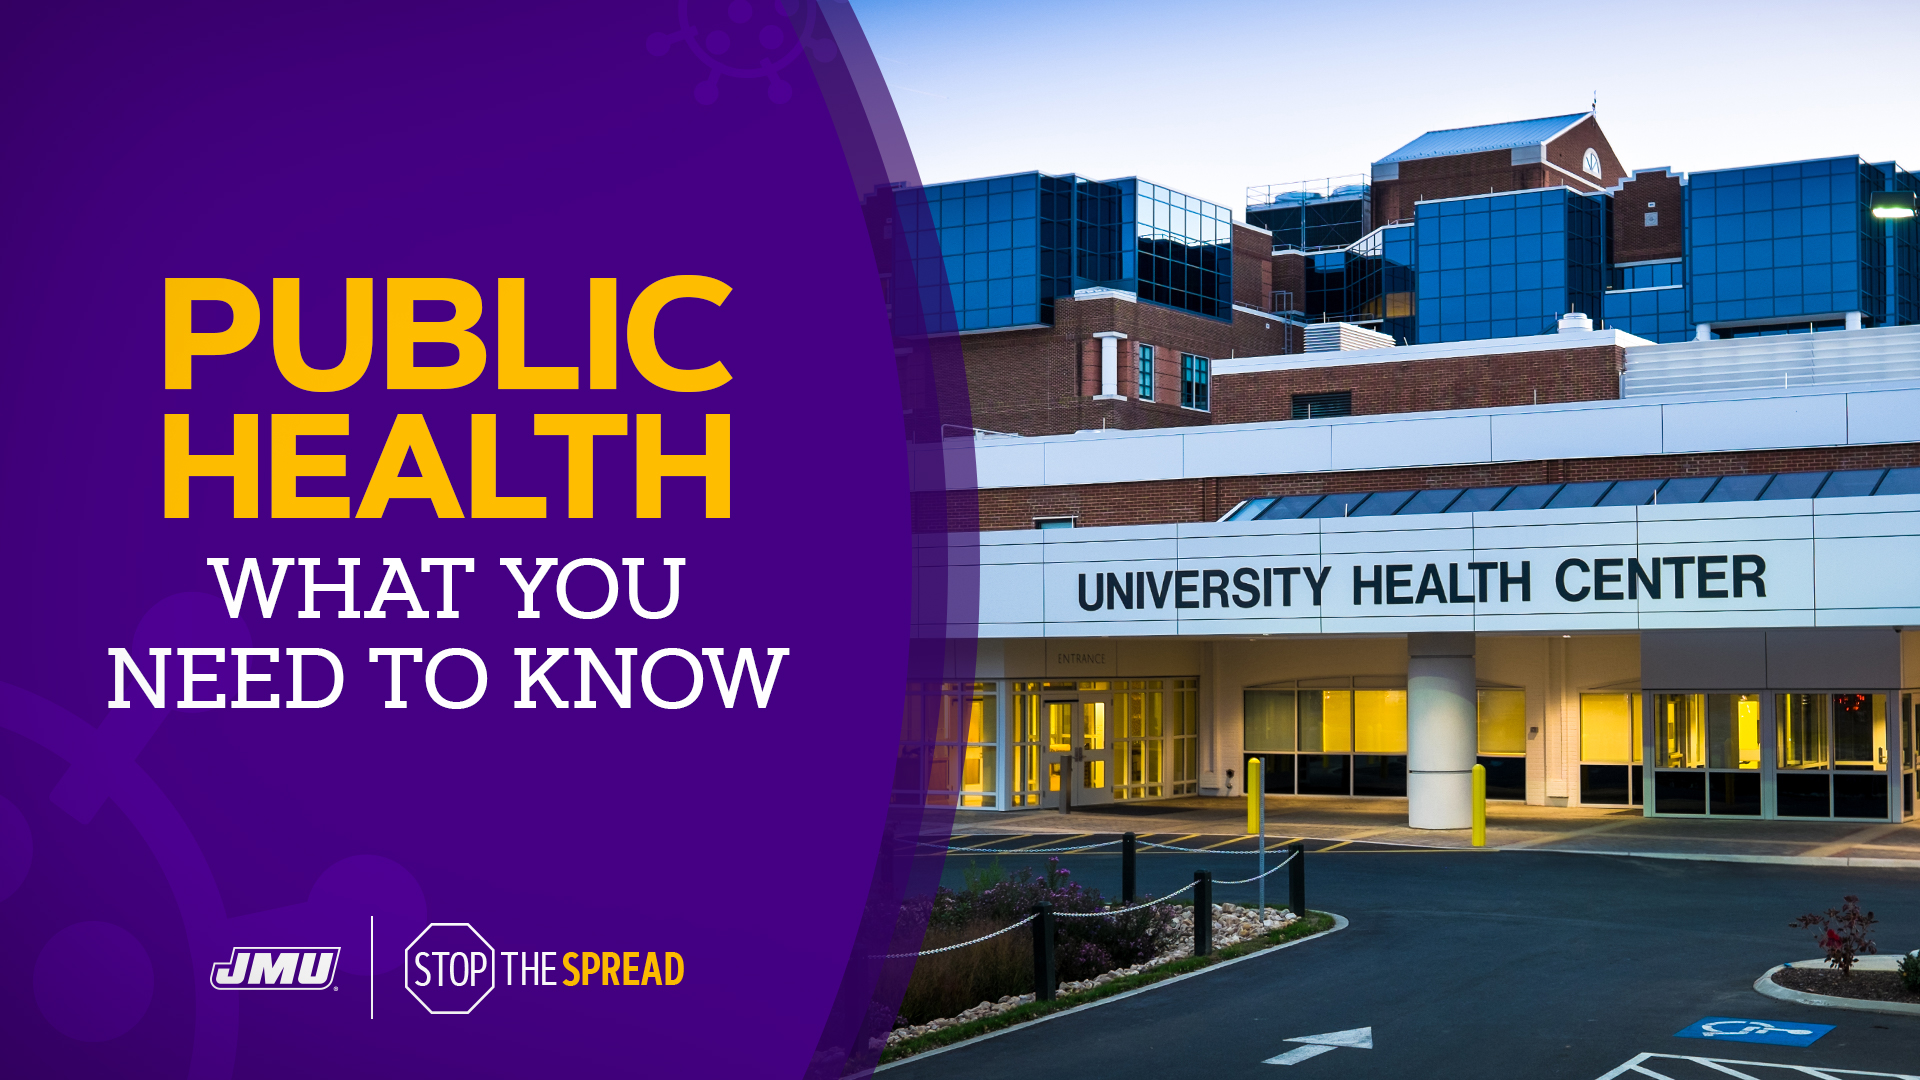 Jmu On Twitter Other Routine Health Practices Will Continue To Be Important Eating Well Exercising Getting Enough Sleep Getting Flu Shot Practicing Safe Sex Twitter